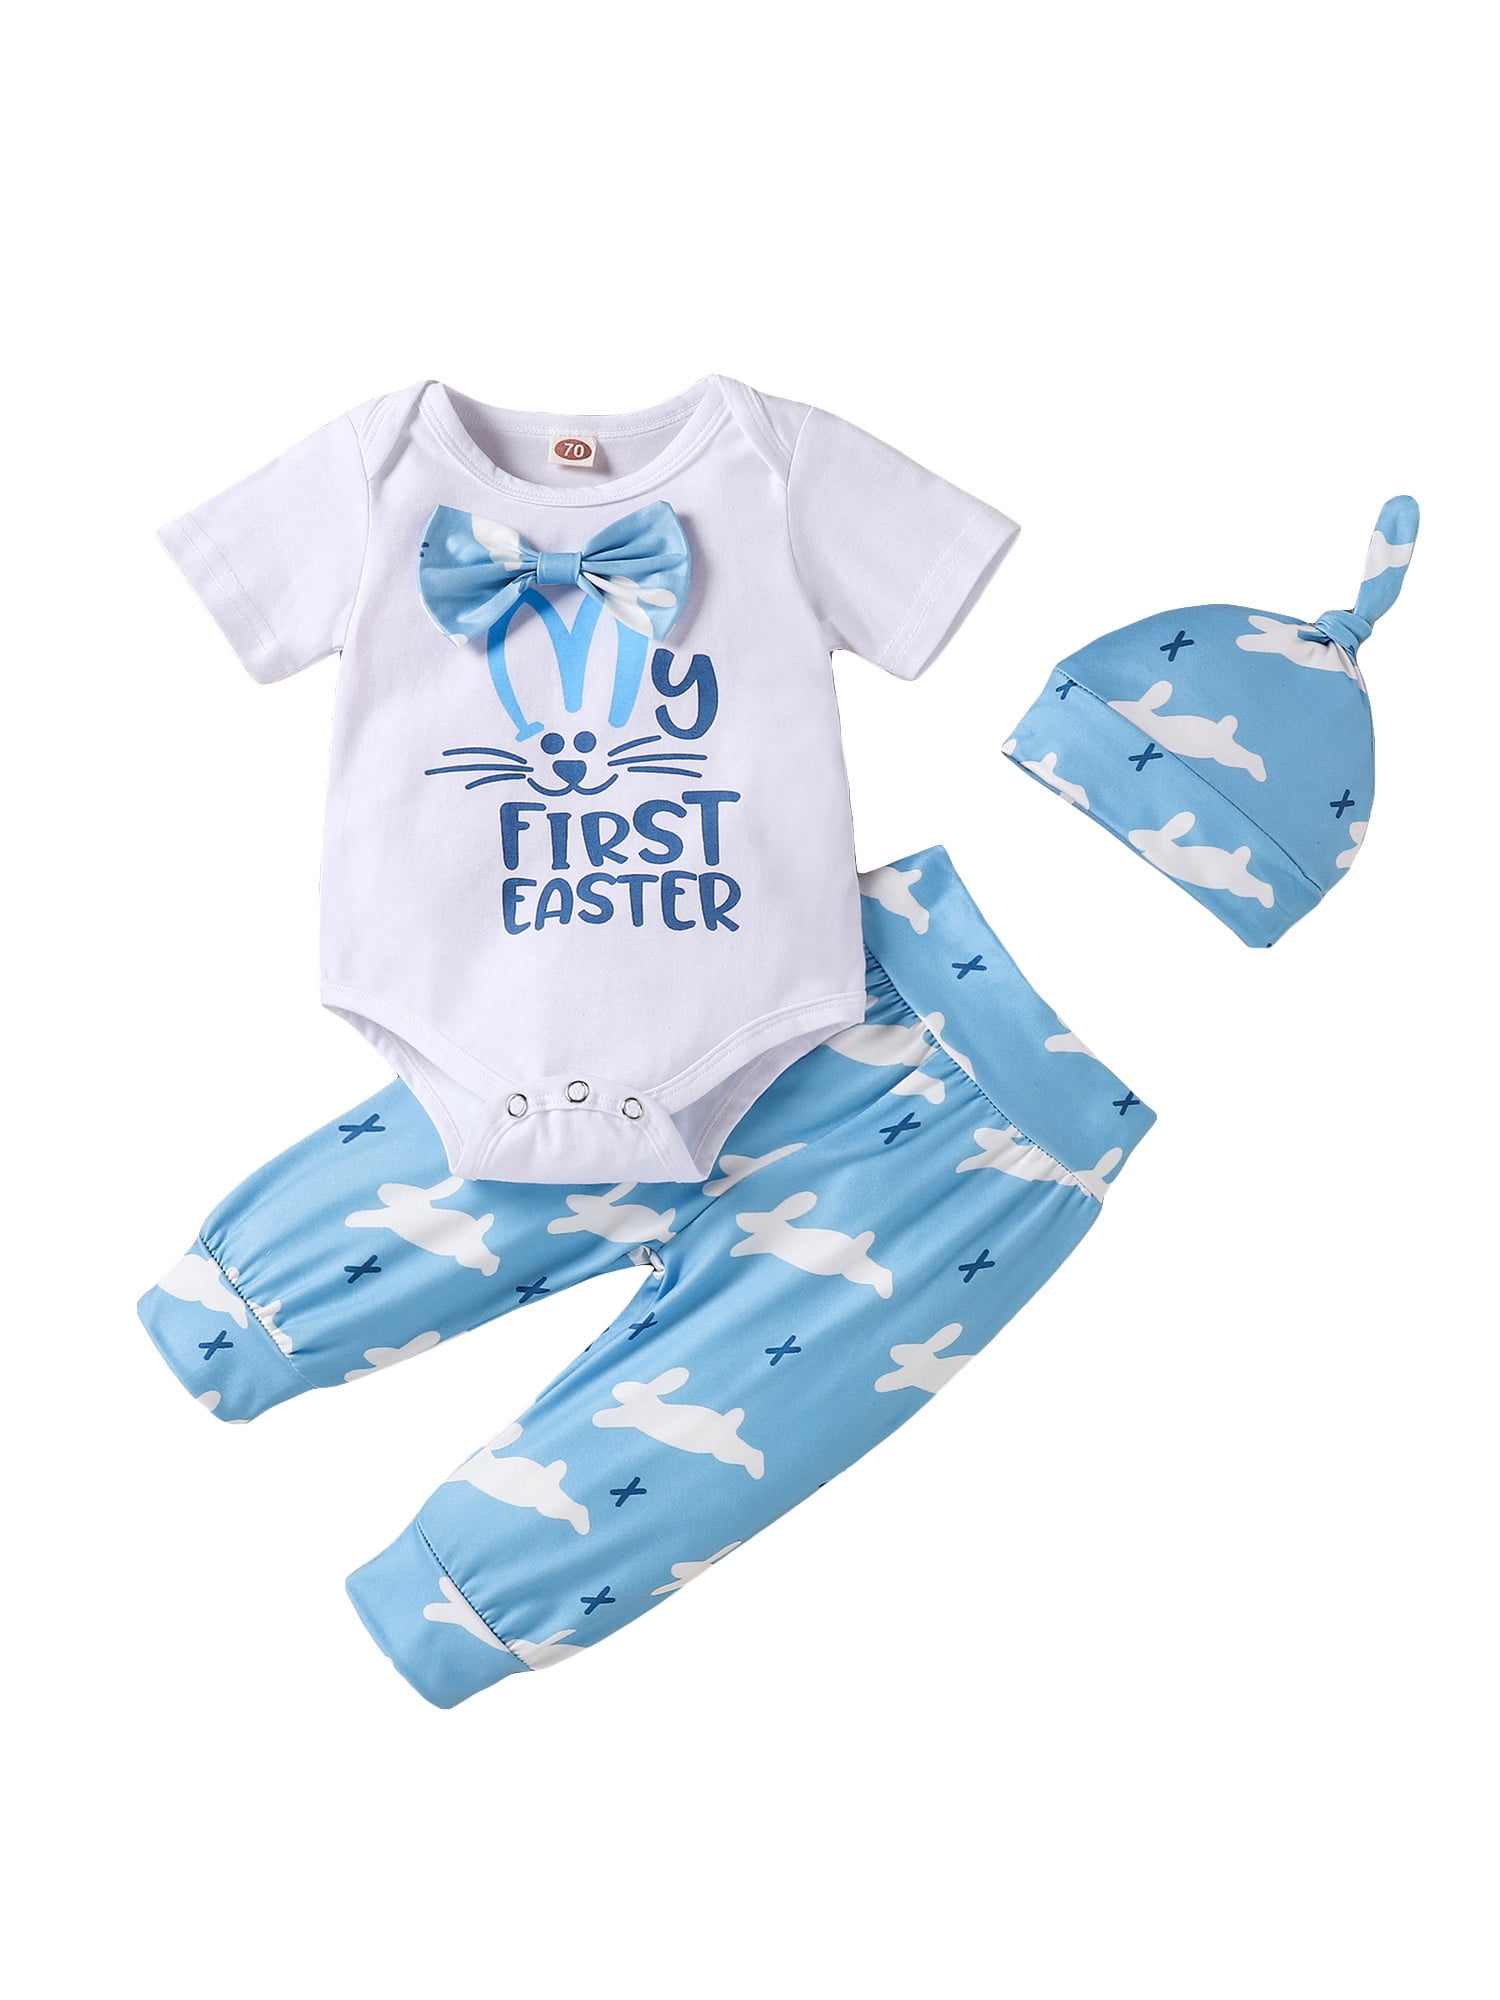 Personalised My First Easter 2019 Baby Vest Romper Baby Gifts Bunny Cute Easter 